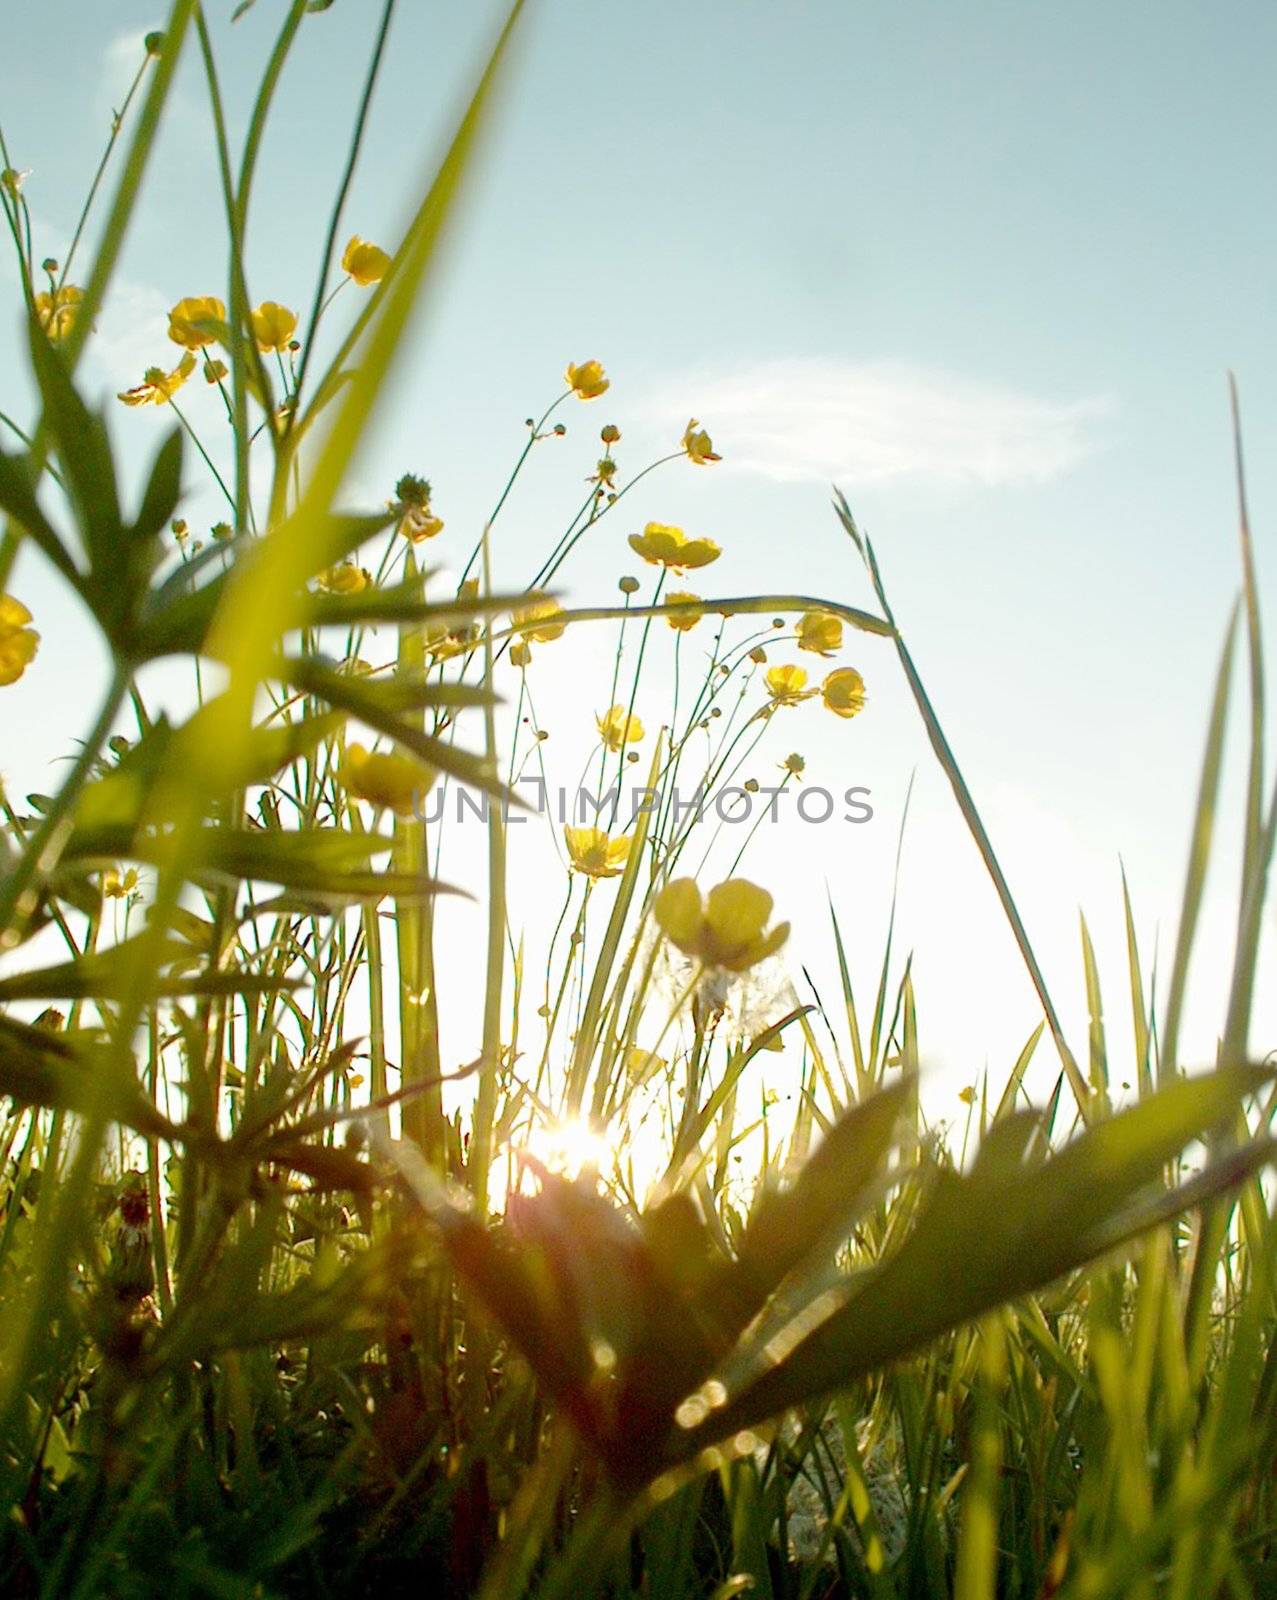 Landscape at springtime Springflowers in a Field